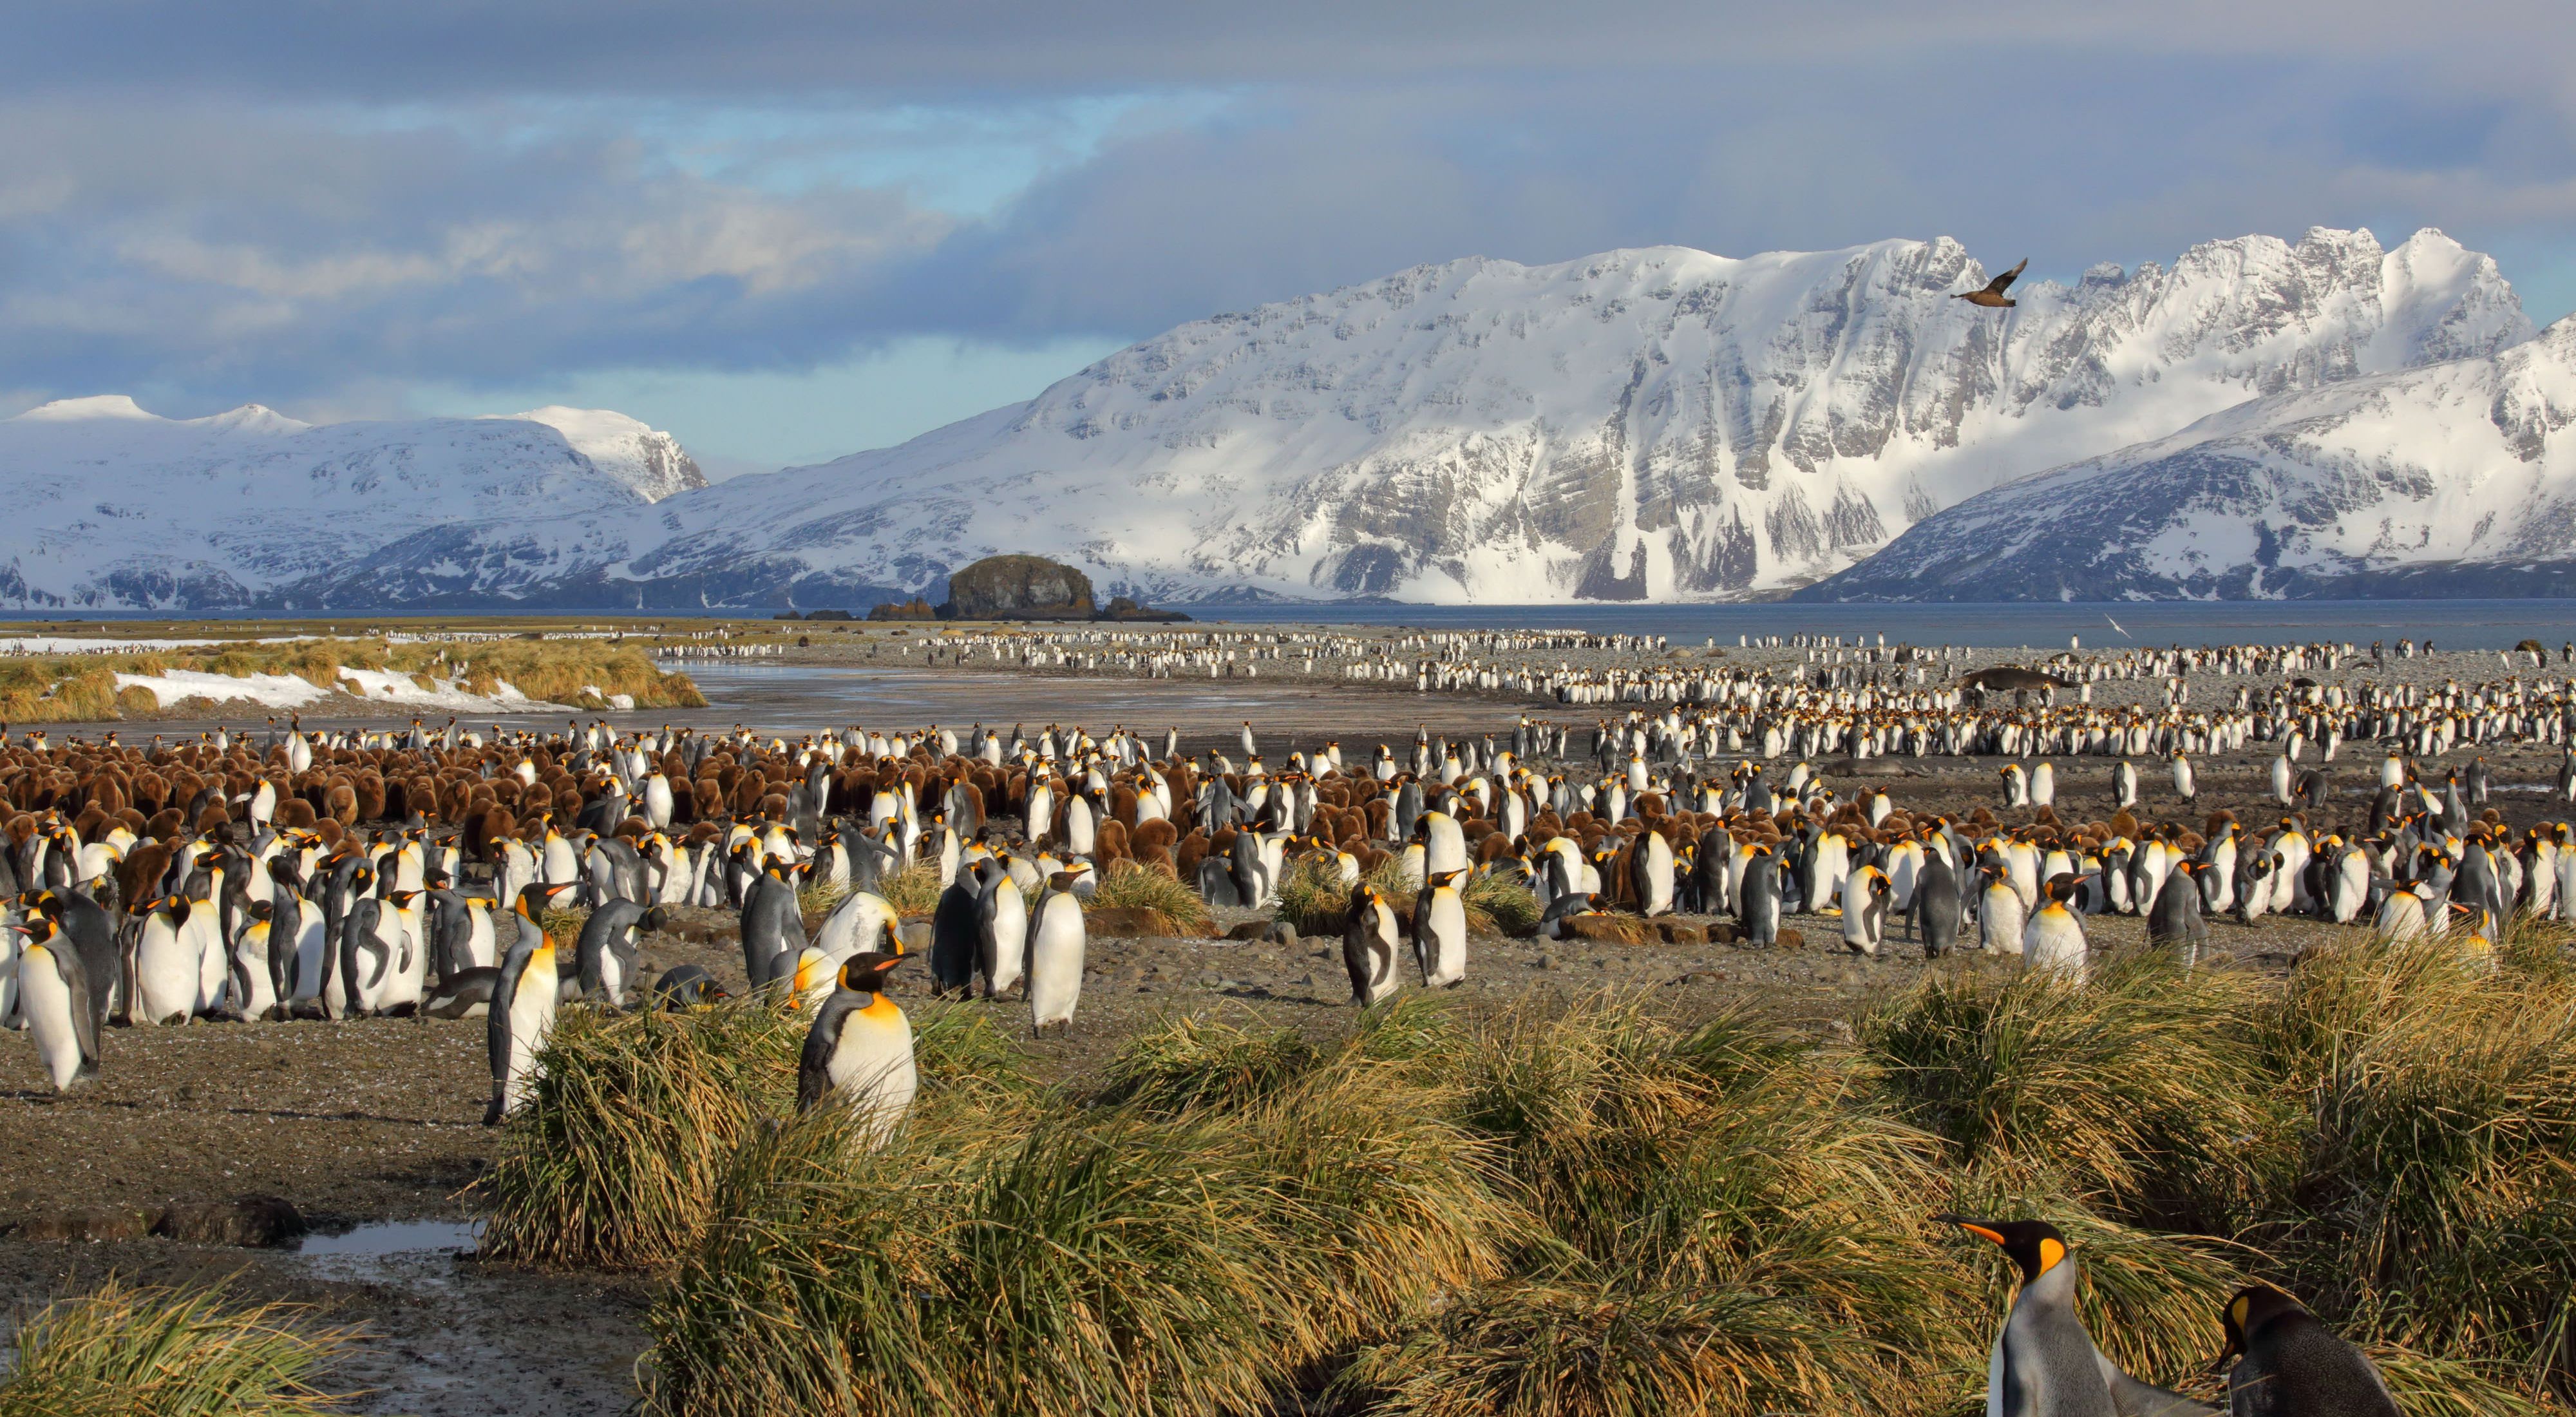 king penguins gather near grasslands and snowcapped mountains